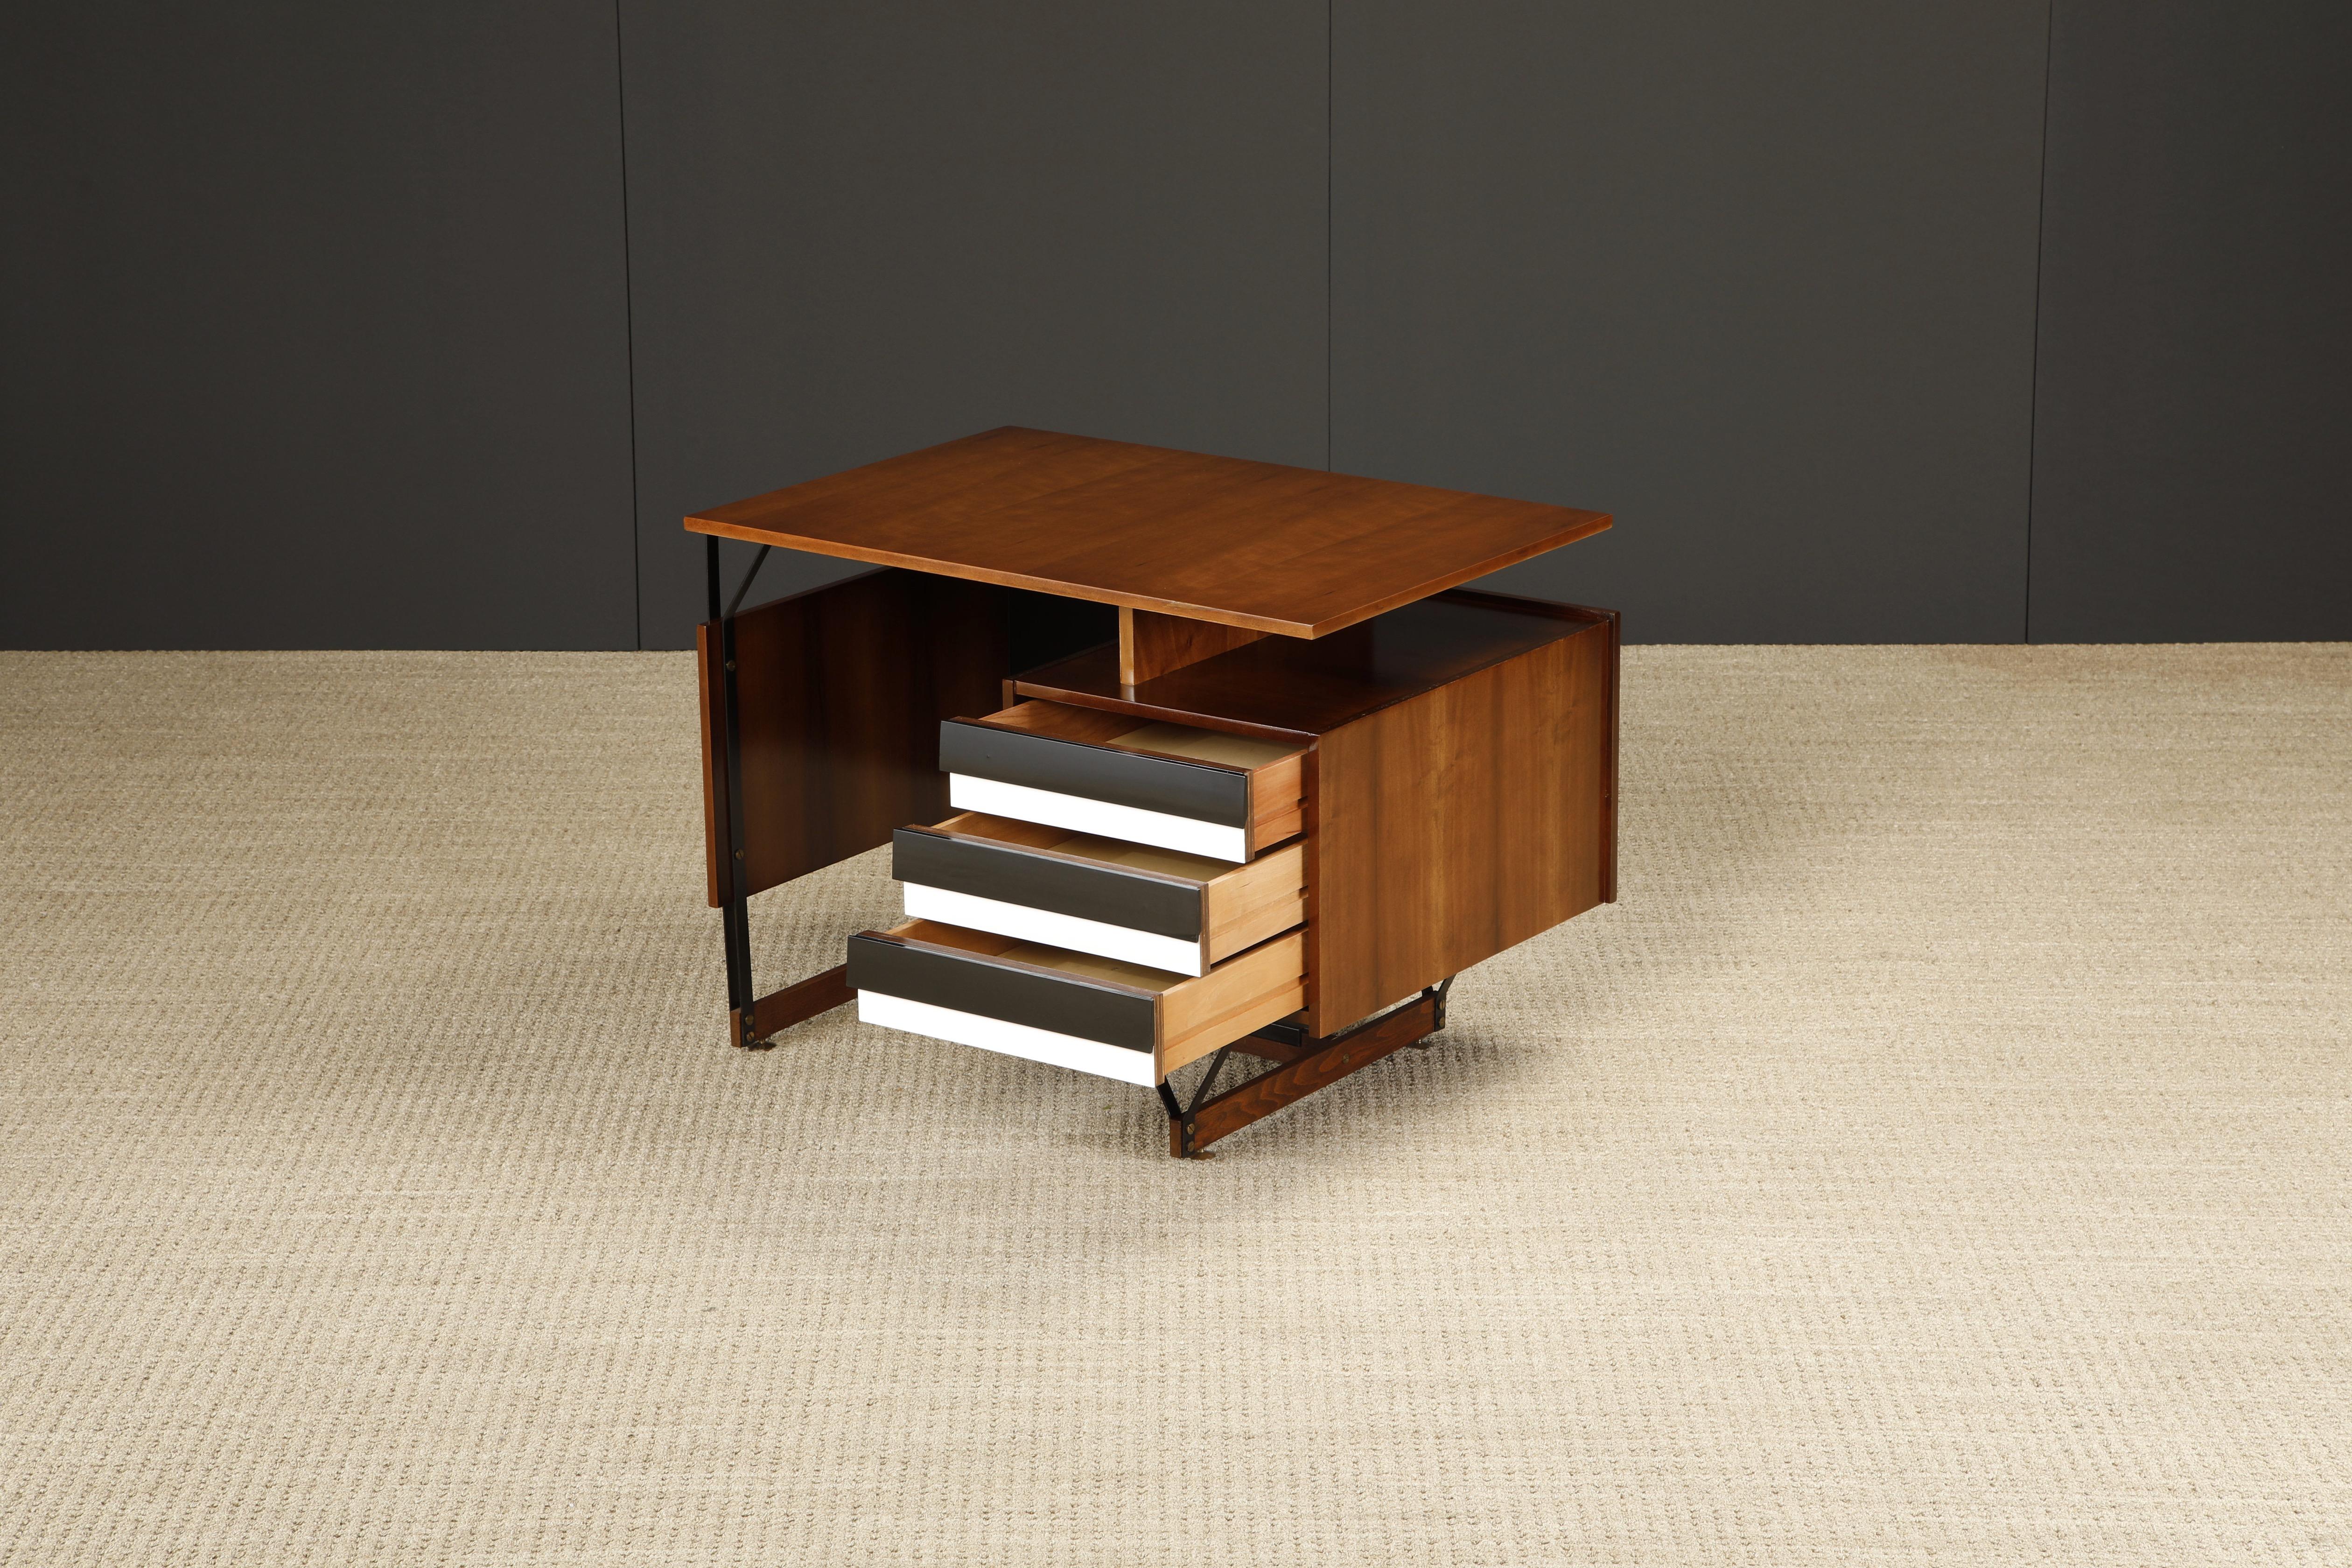 Italian Mid-Century Modern Desk, Style of Gio Ponti, c 1950s, Refinished For Sale 14